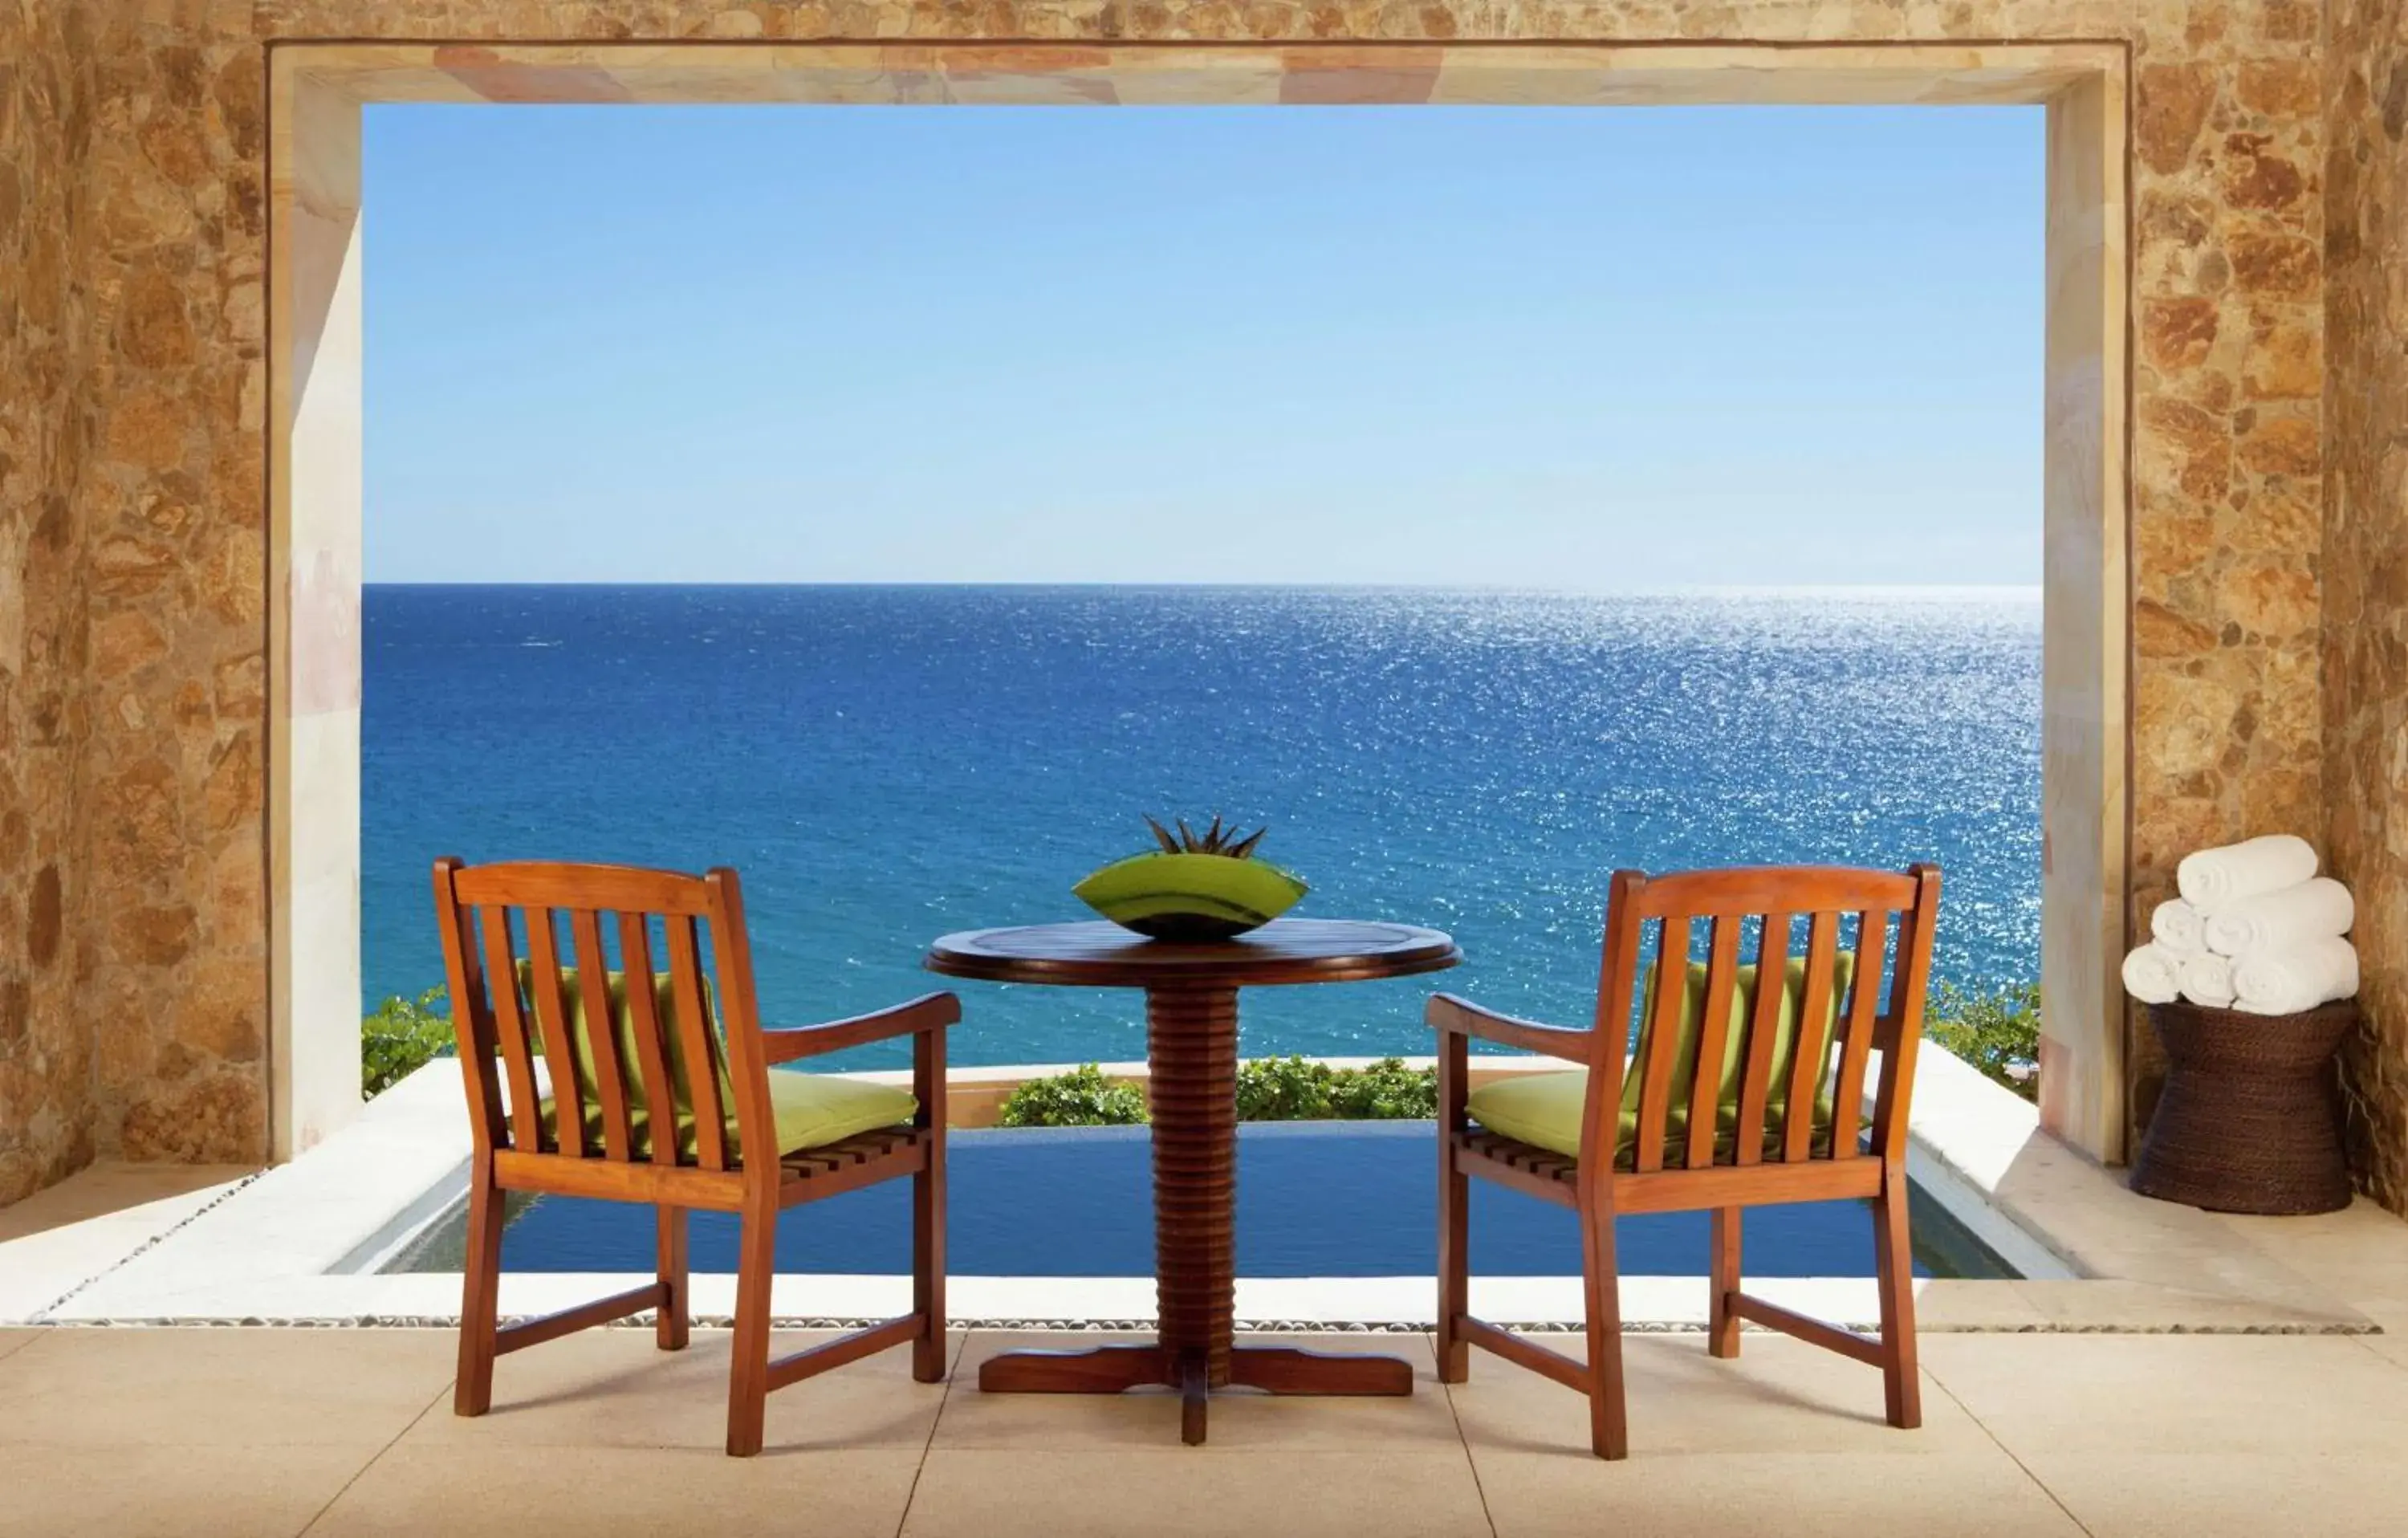 View (from property/room) in Waldorf Astoria Los Cabos Pedregal